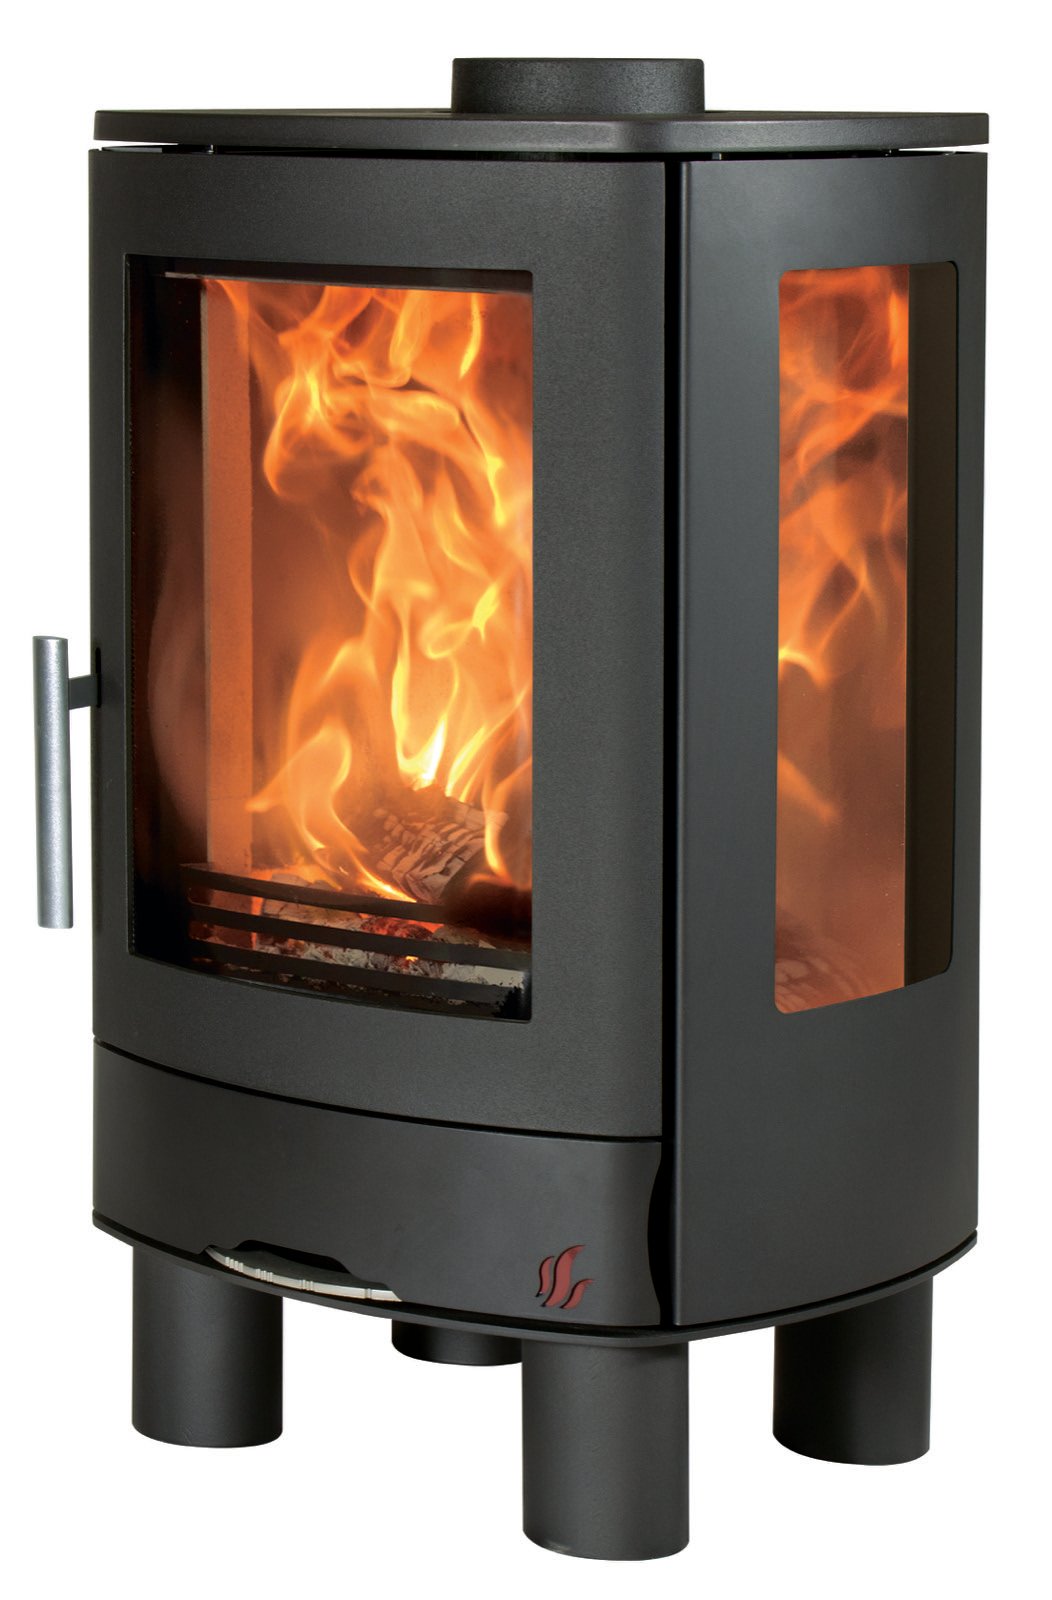 ACR Neo 3F - Multifuel Stove with glass sides, floor standing model